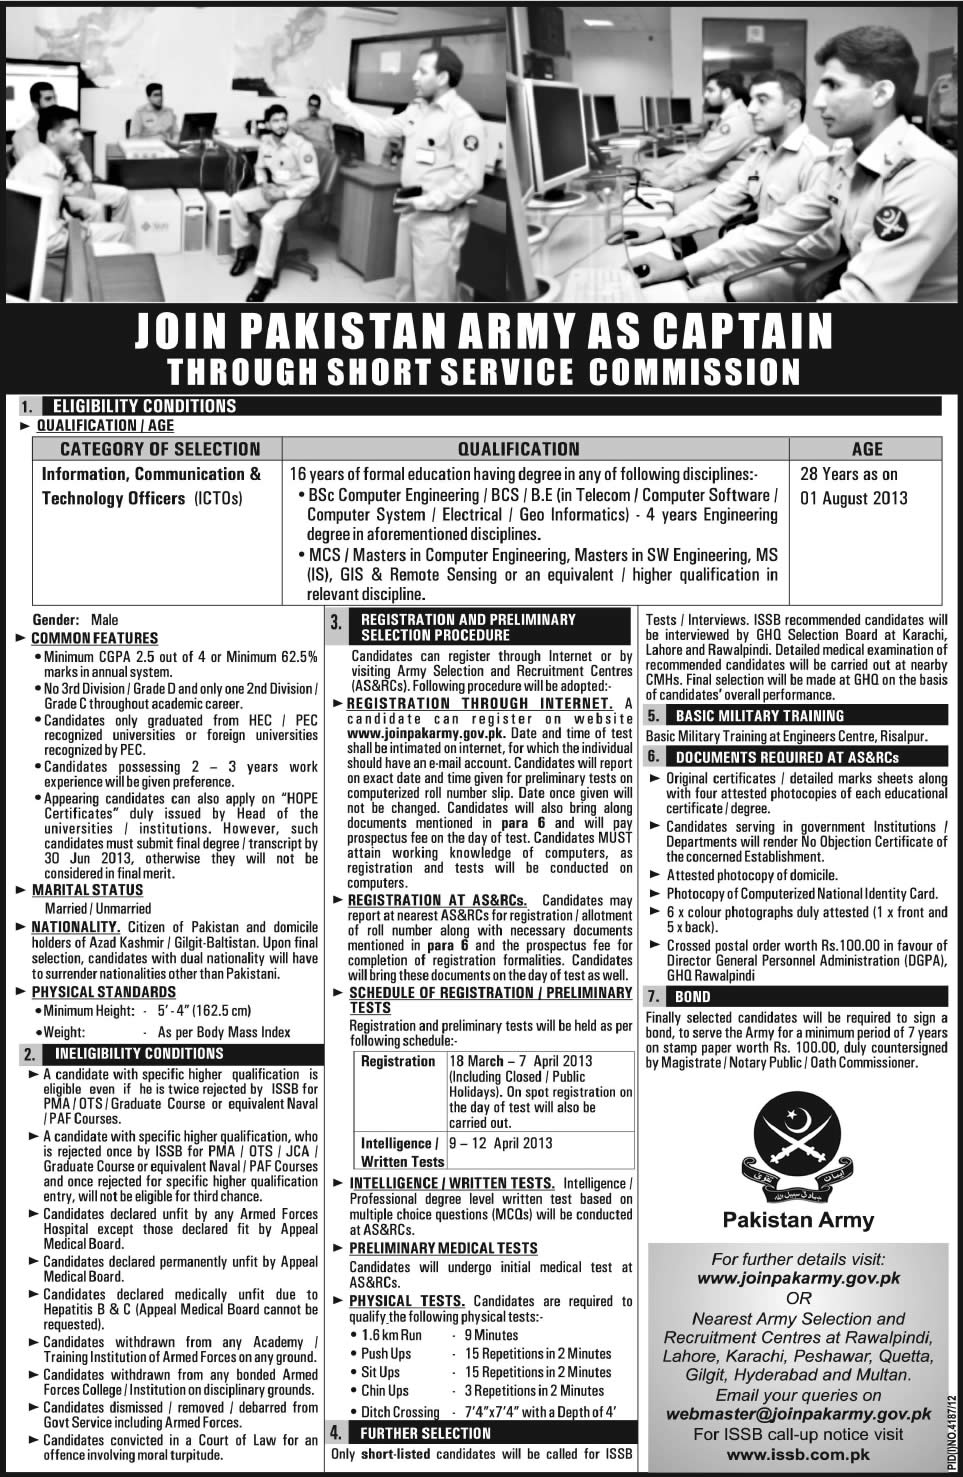 Join Pakistan Army as ICTO Captain 2013 for Engineers  (Computer/Software/Telecom/Electrical/GIS)